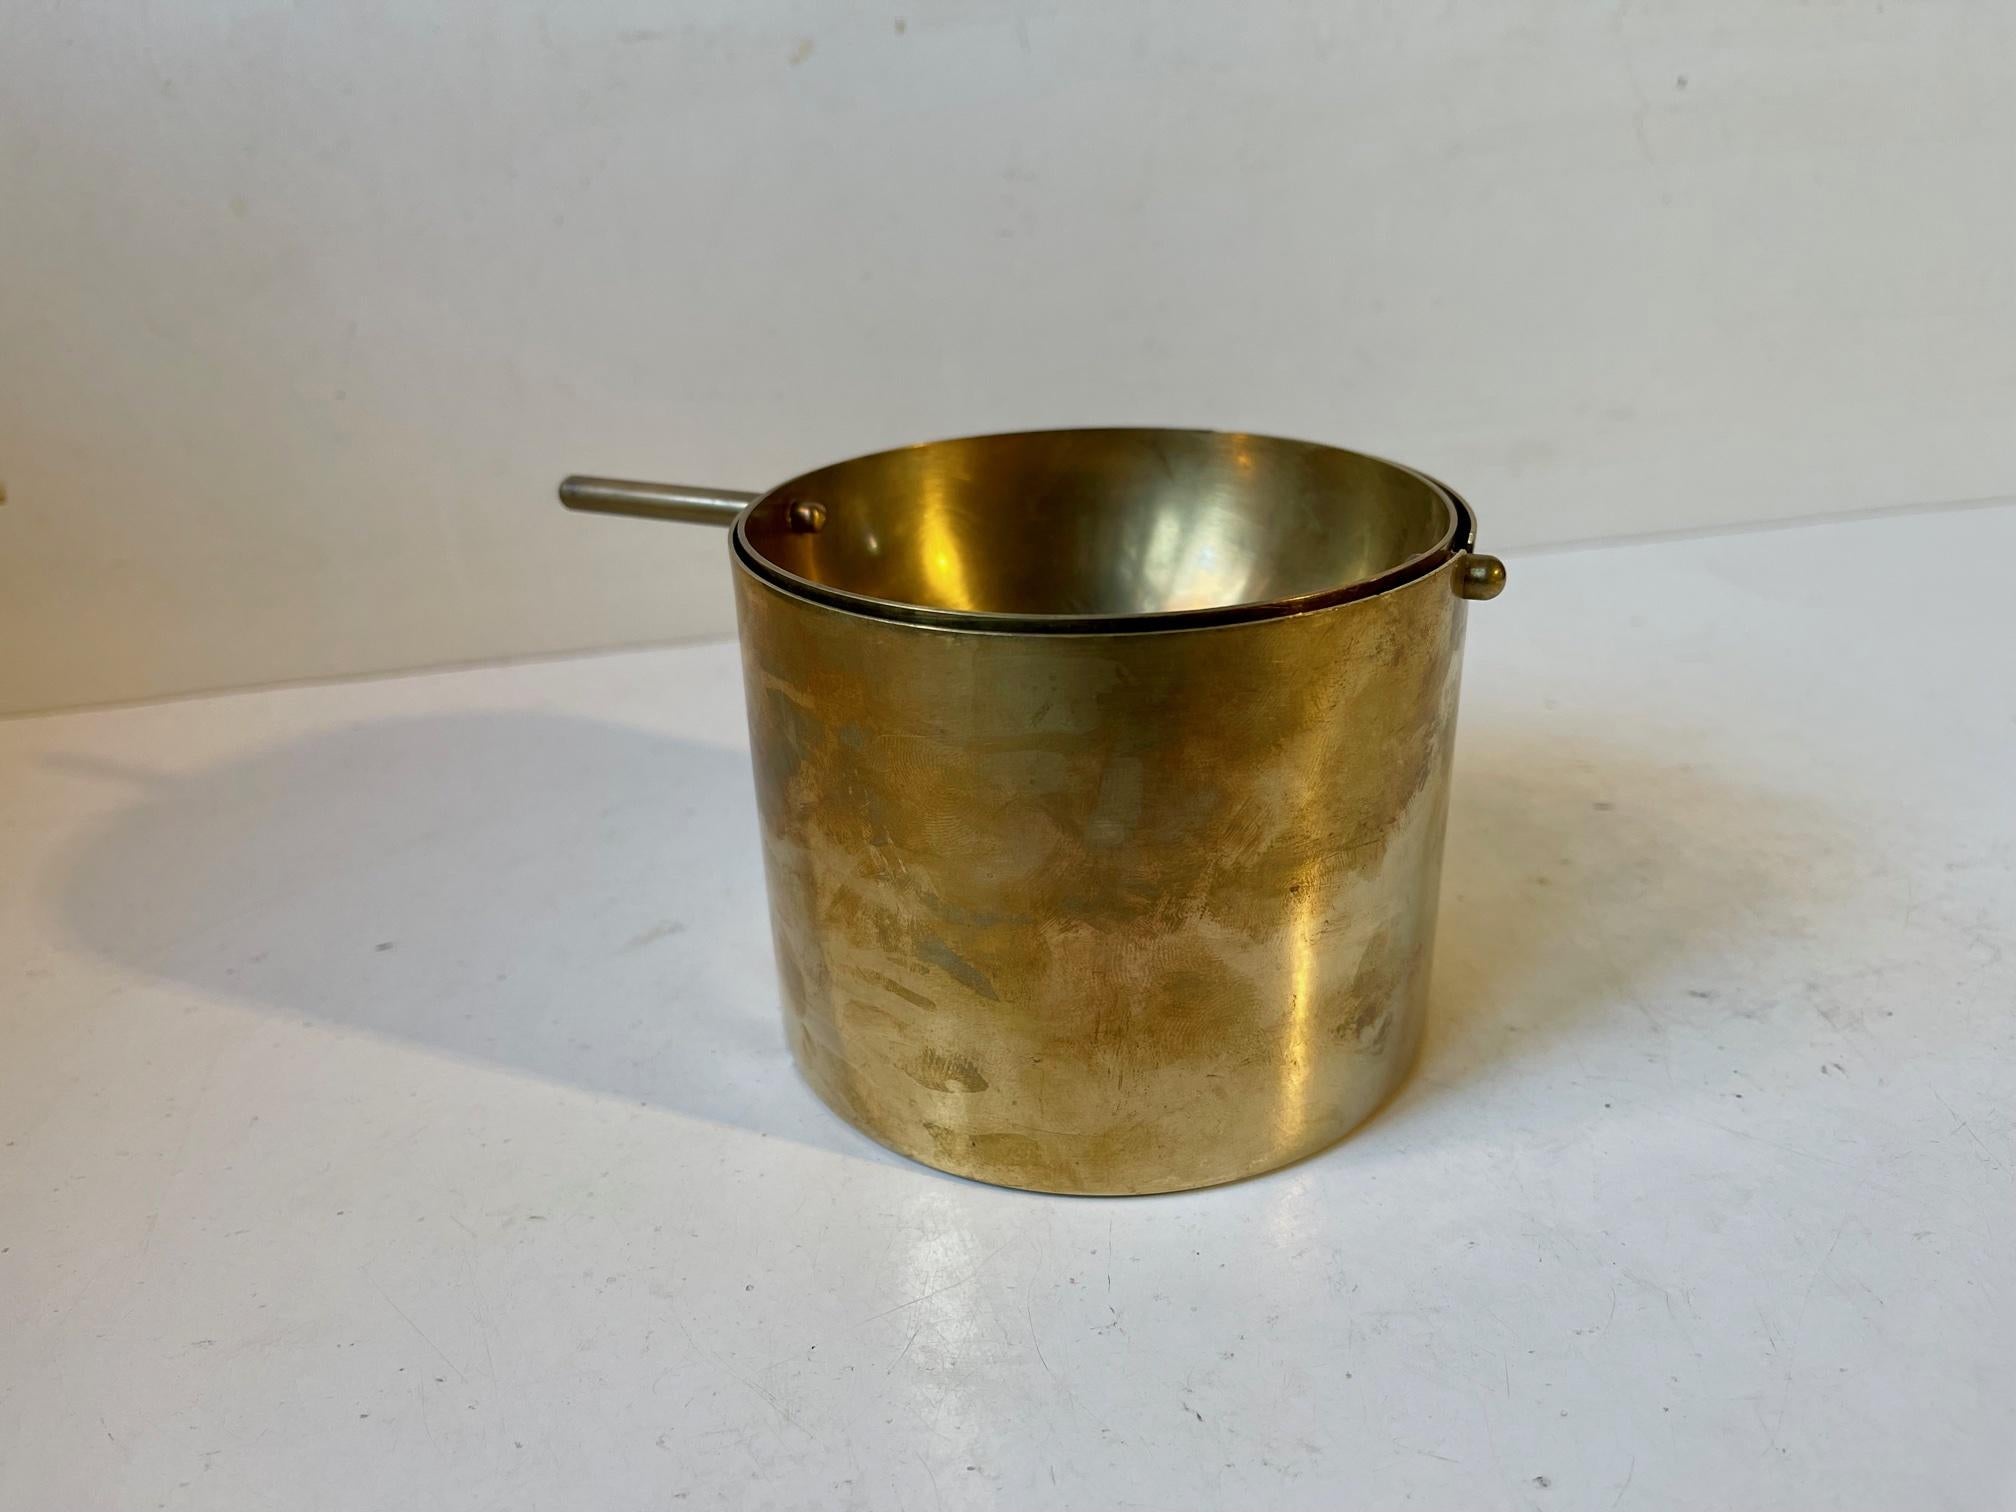 Large Brass Ashtray Cylinda-Line by Arne Jacobsen for Stelton, 1960s For Sale 2